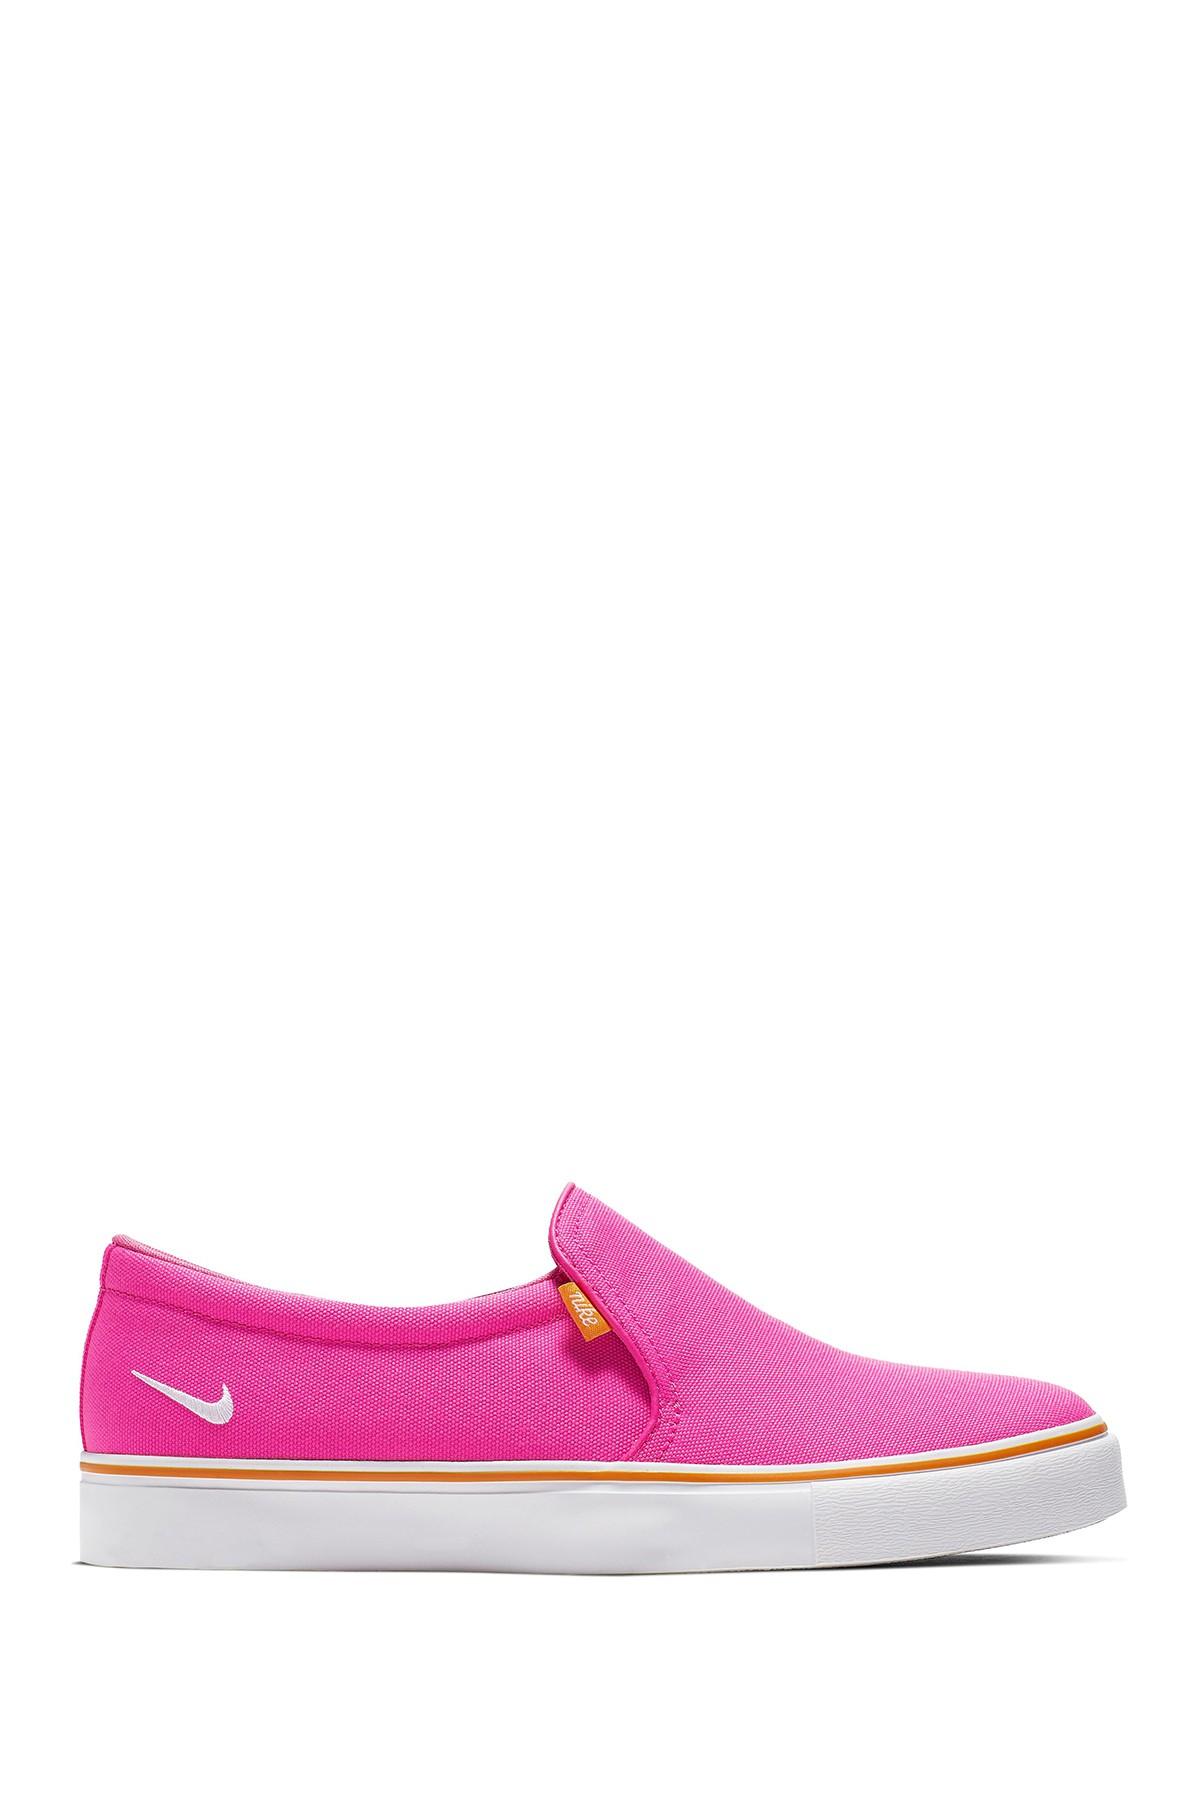 Nike Court Royale Ac Slip-on Sneaker in Pink | Lyst